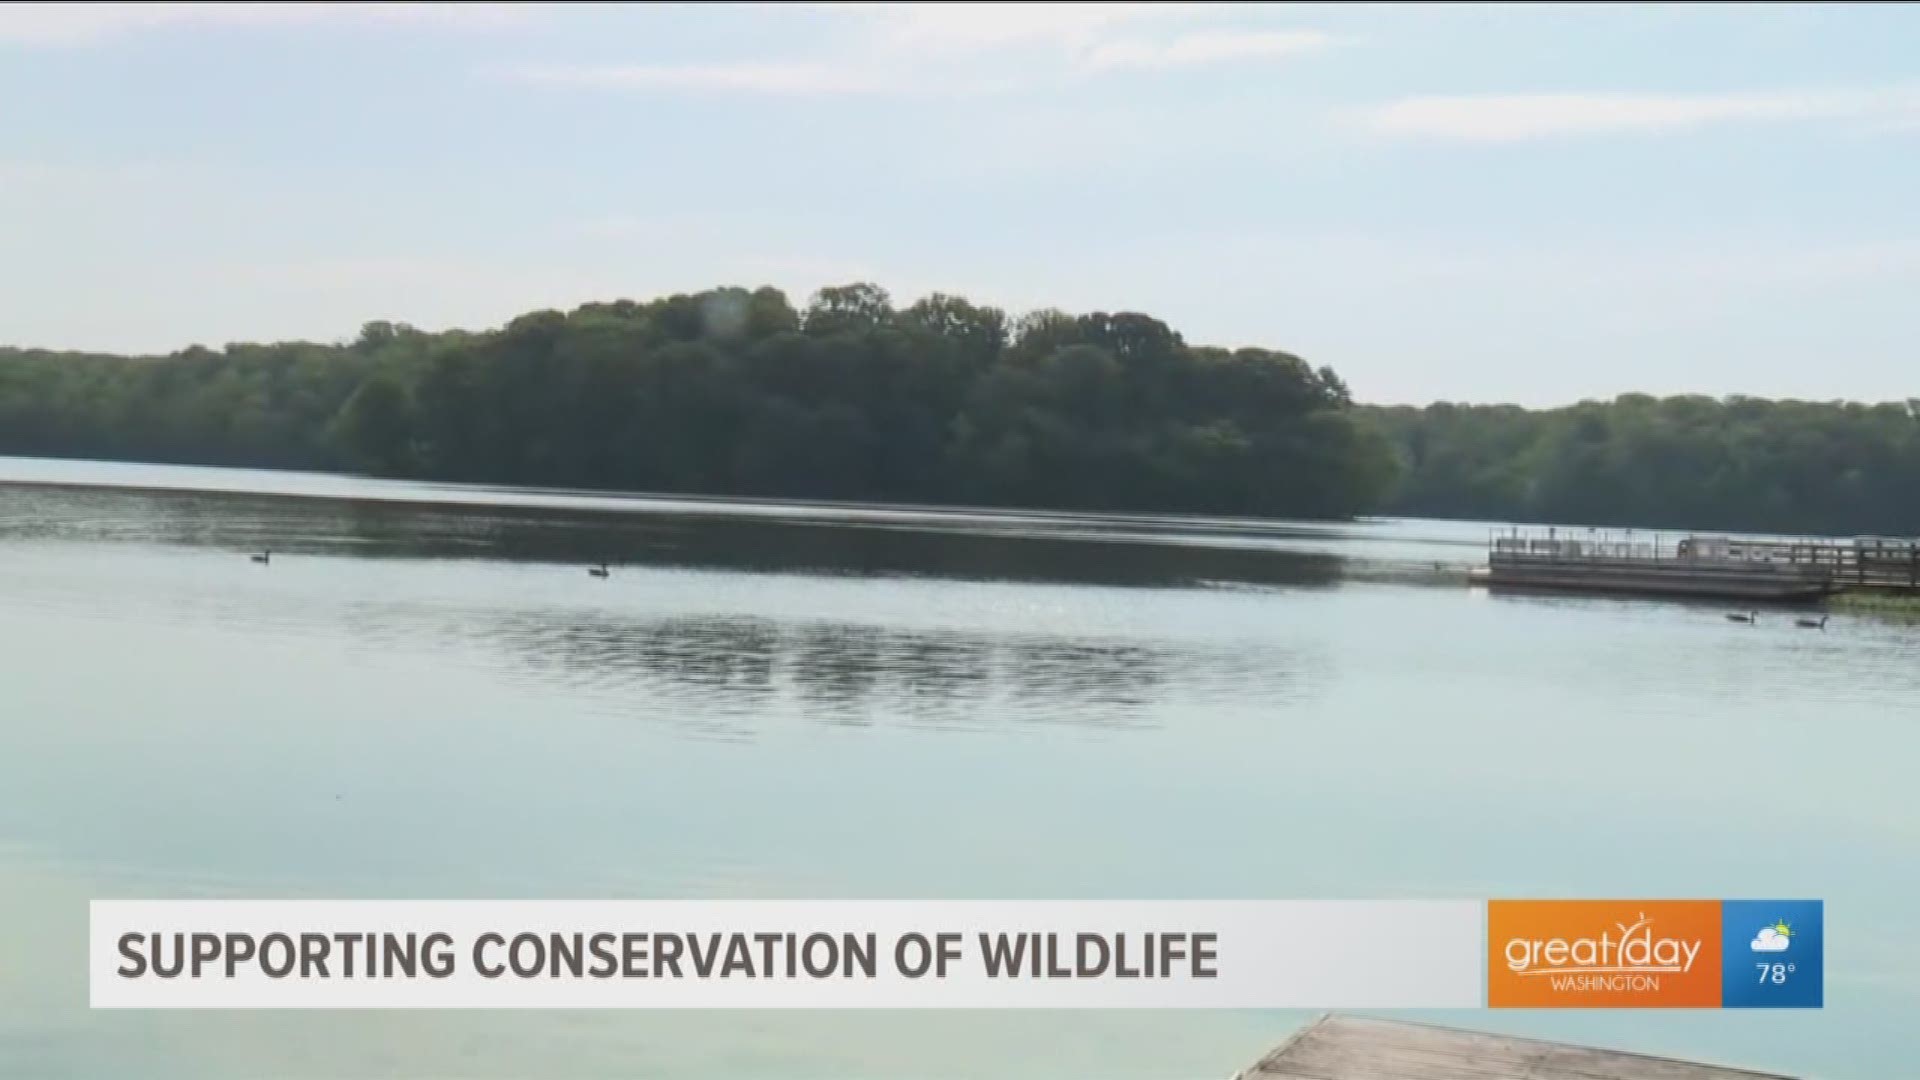 We explore how to help wildlife conservation on a local level at Burke Lake Park in Fairfax County.